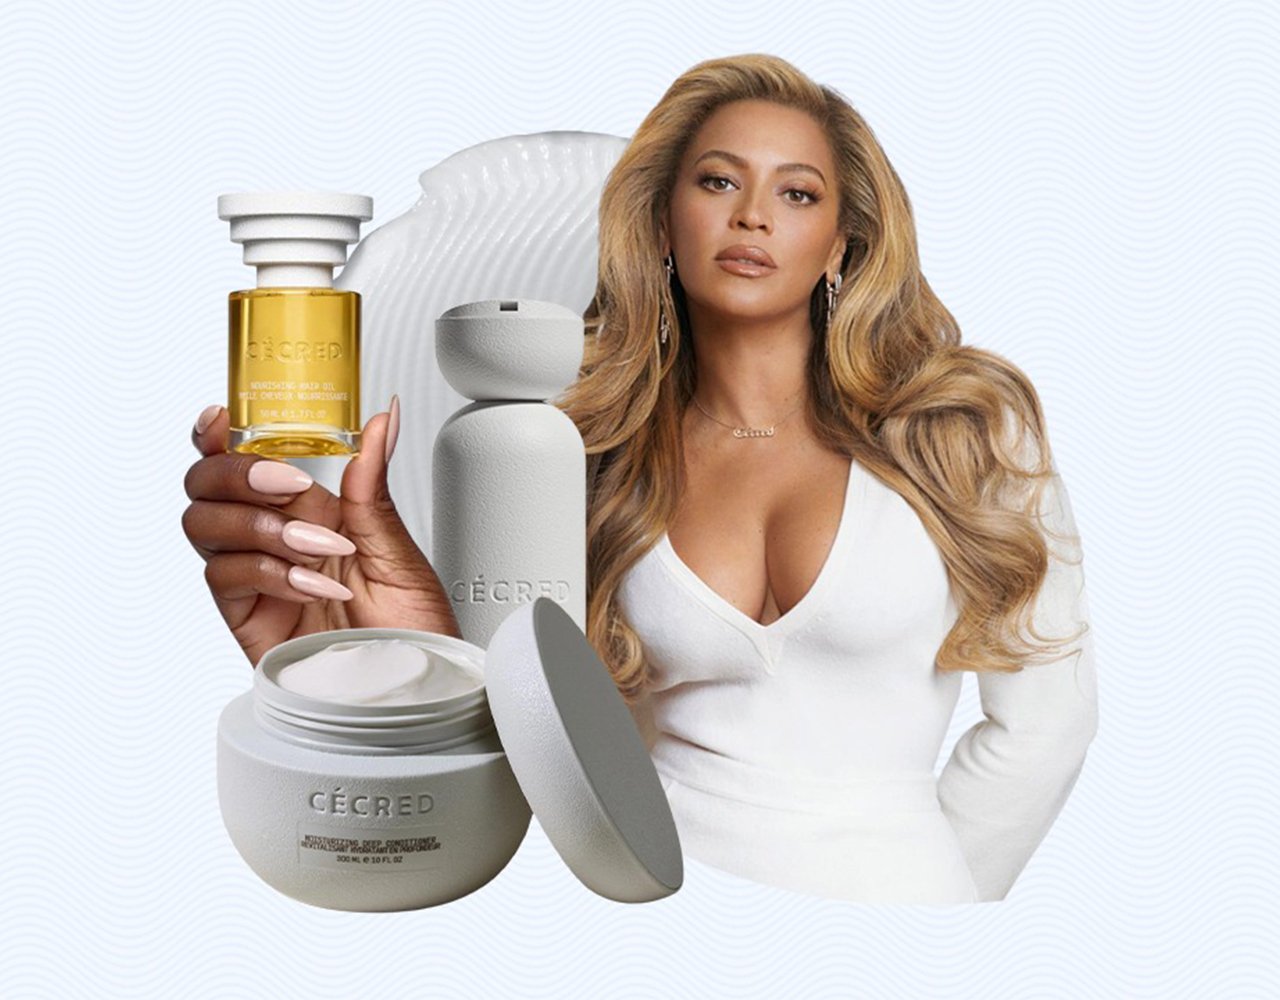 I Tested Beyonce's New Hair Care Line - Here Are My Honest Thoughts